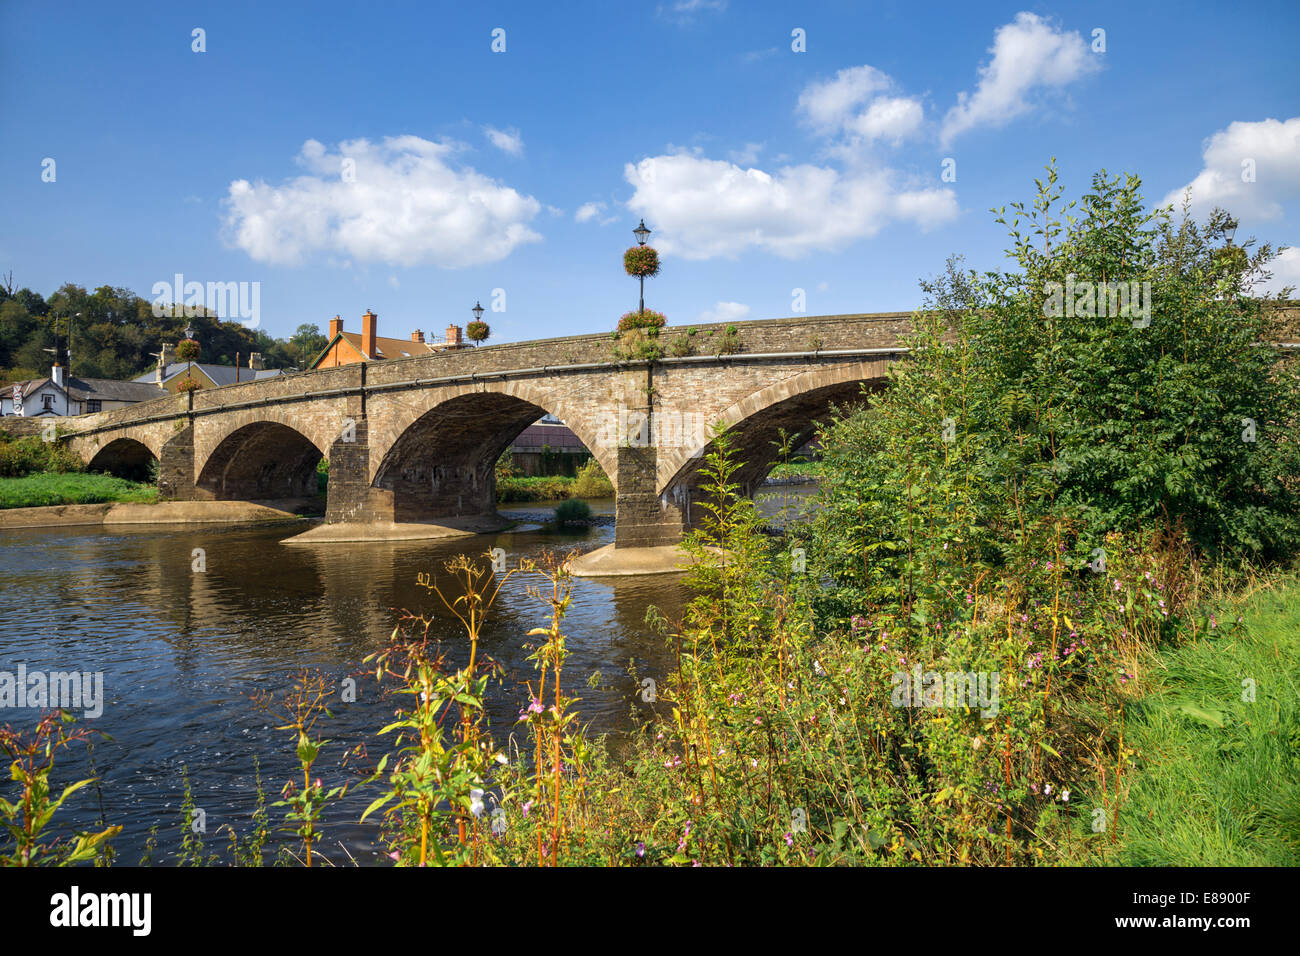 Ponte sul fiume Usk a Usk, Monmouthshire. Foto Stock